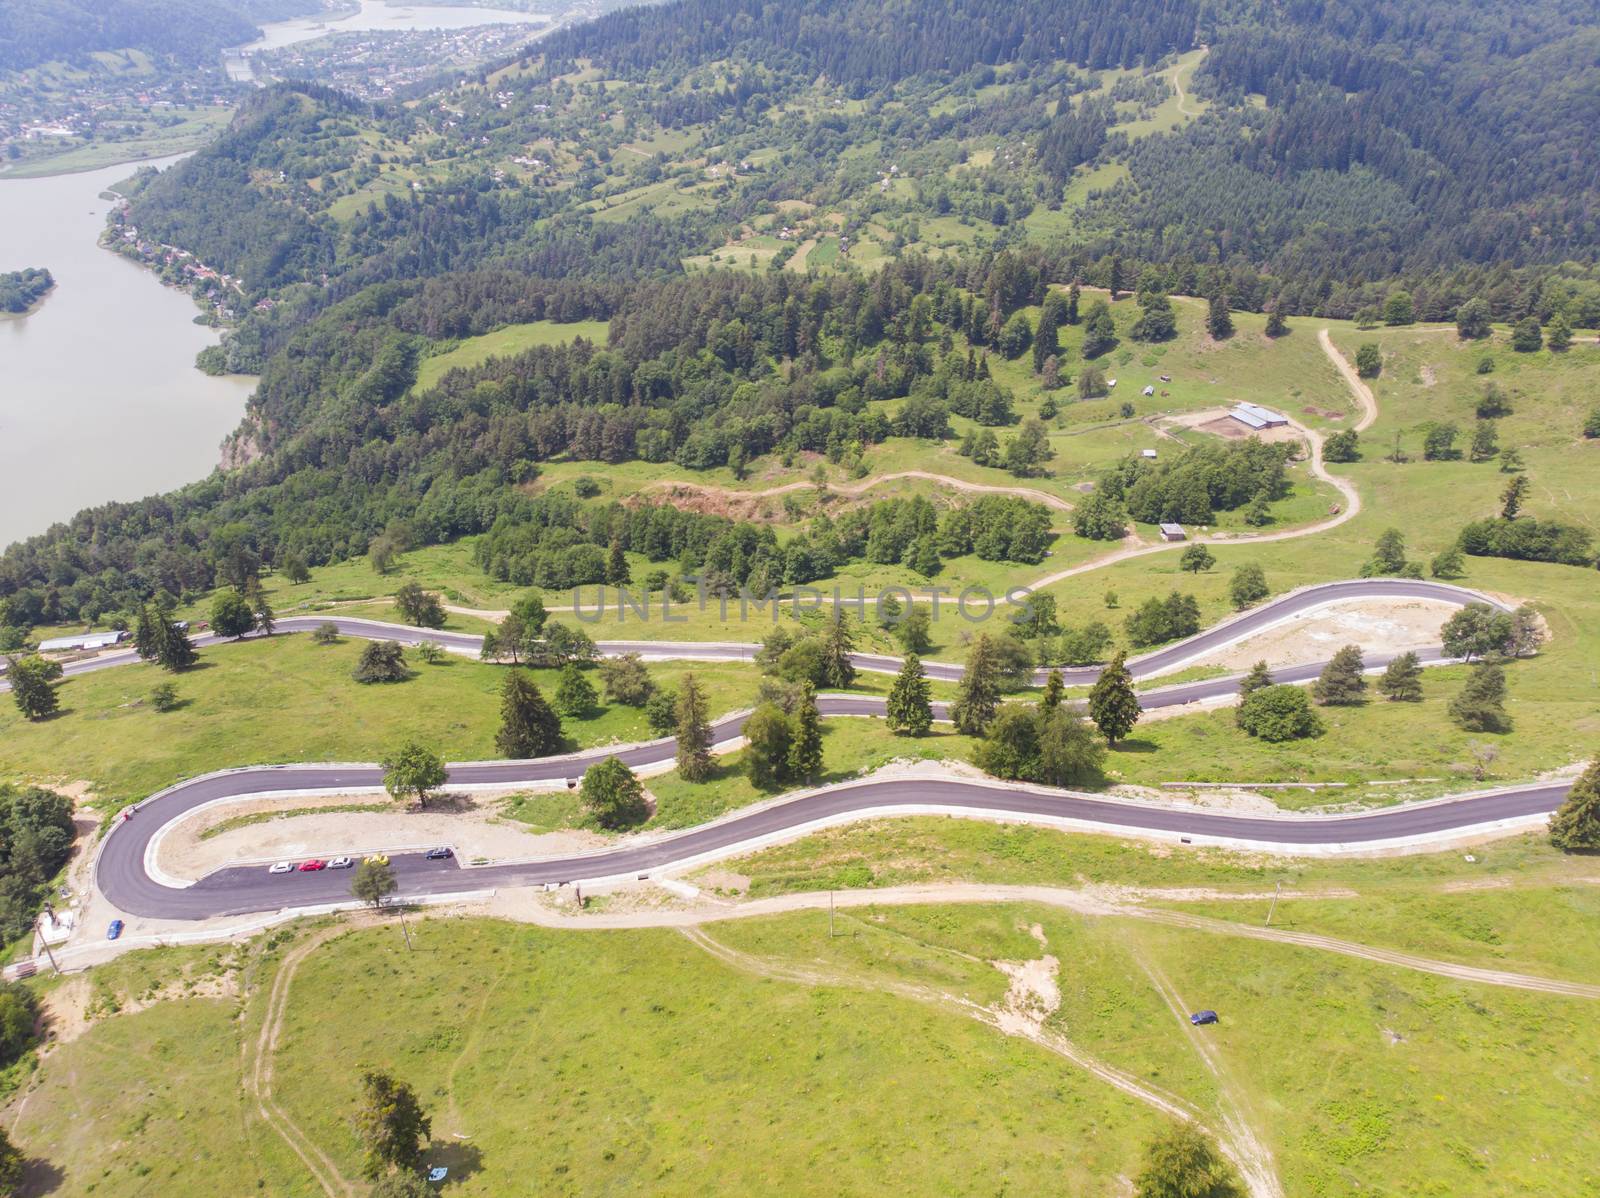 Aerial view of curvy road on mountain by savcoco